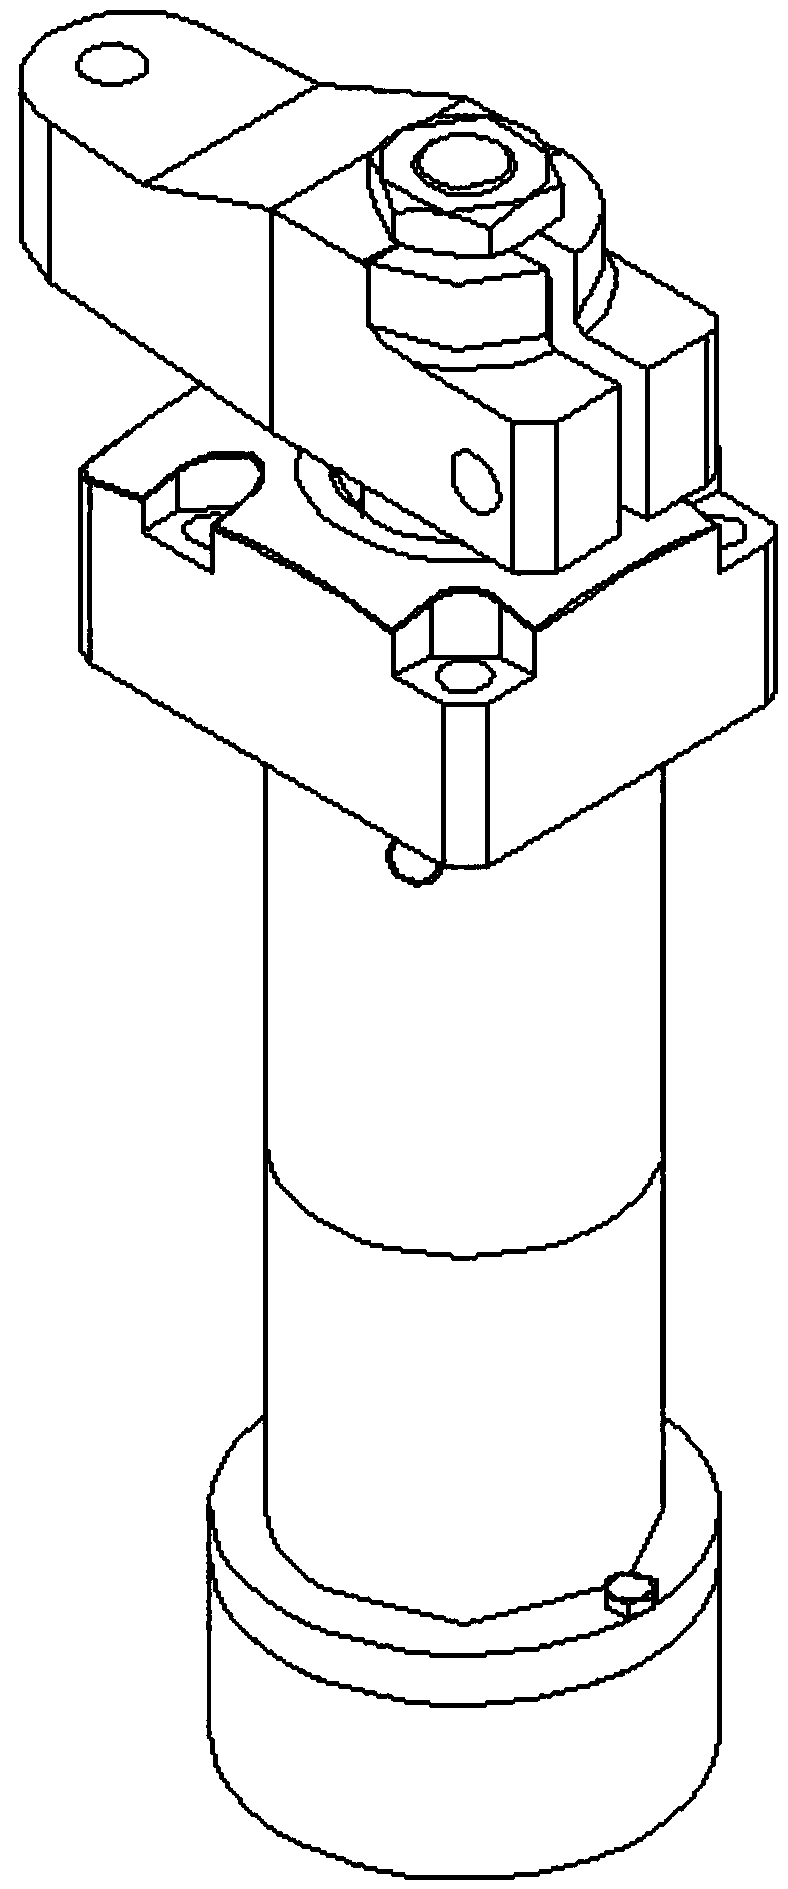 Intelligent adjustment of clamping force cylinder